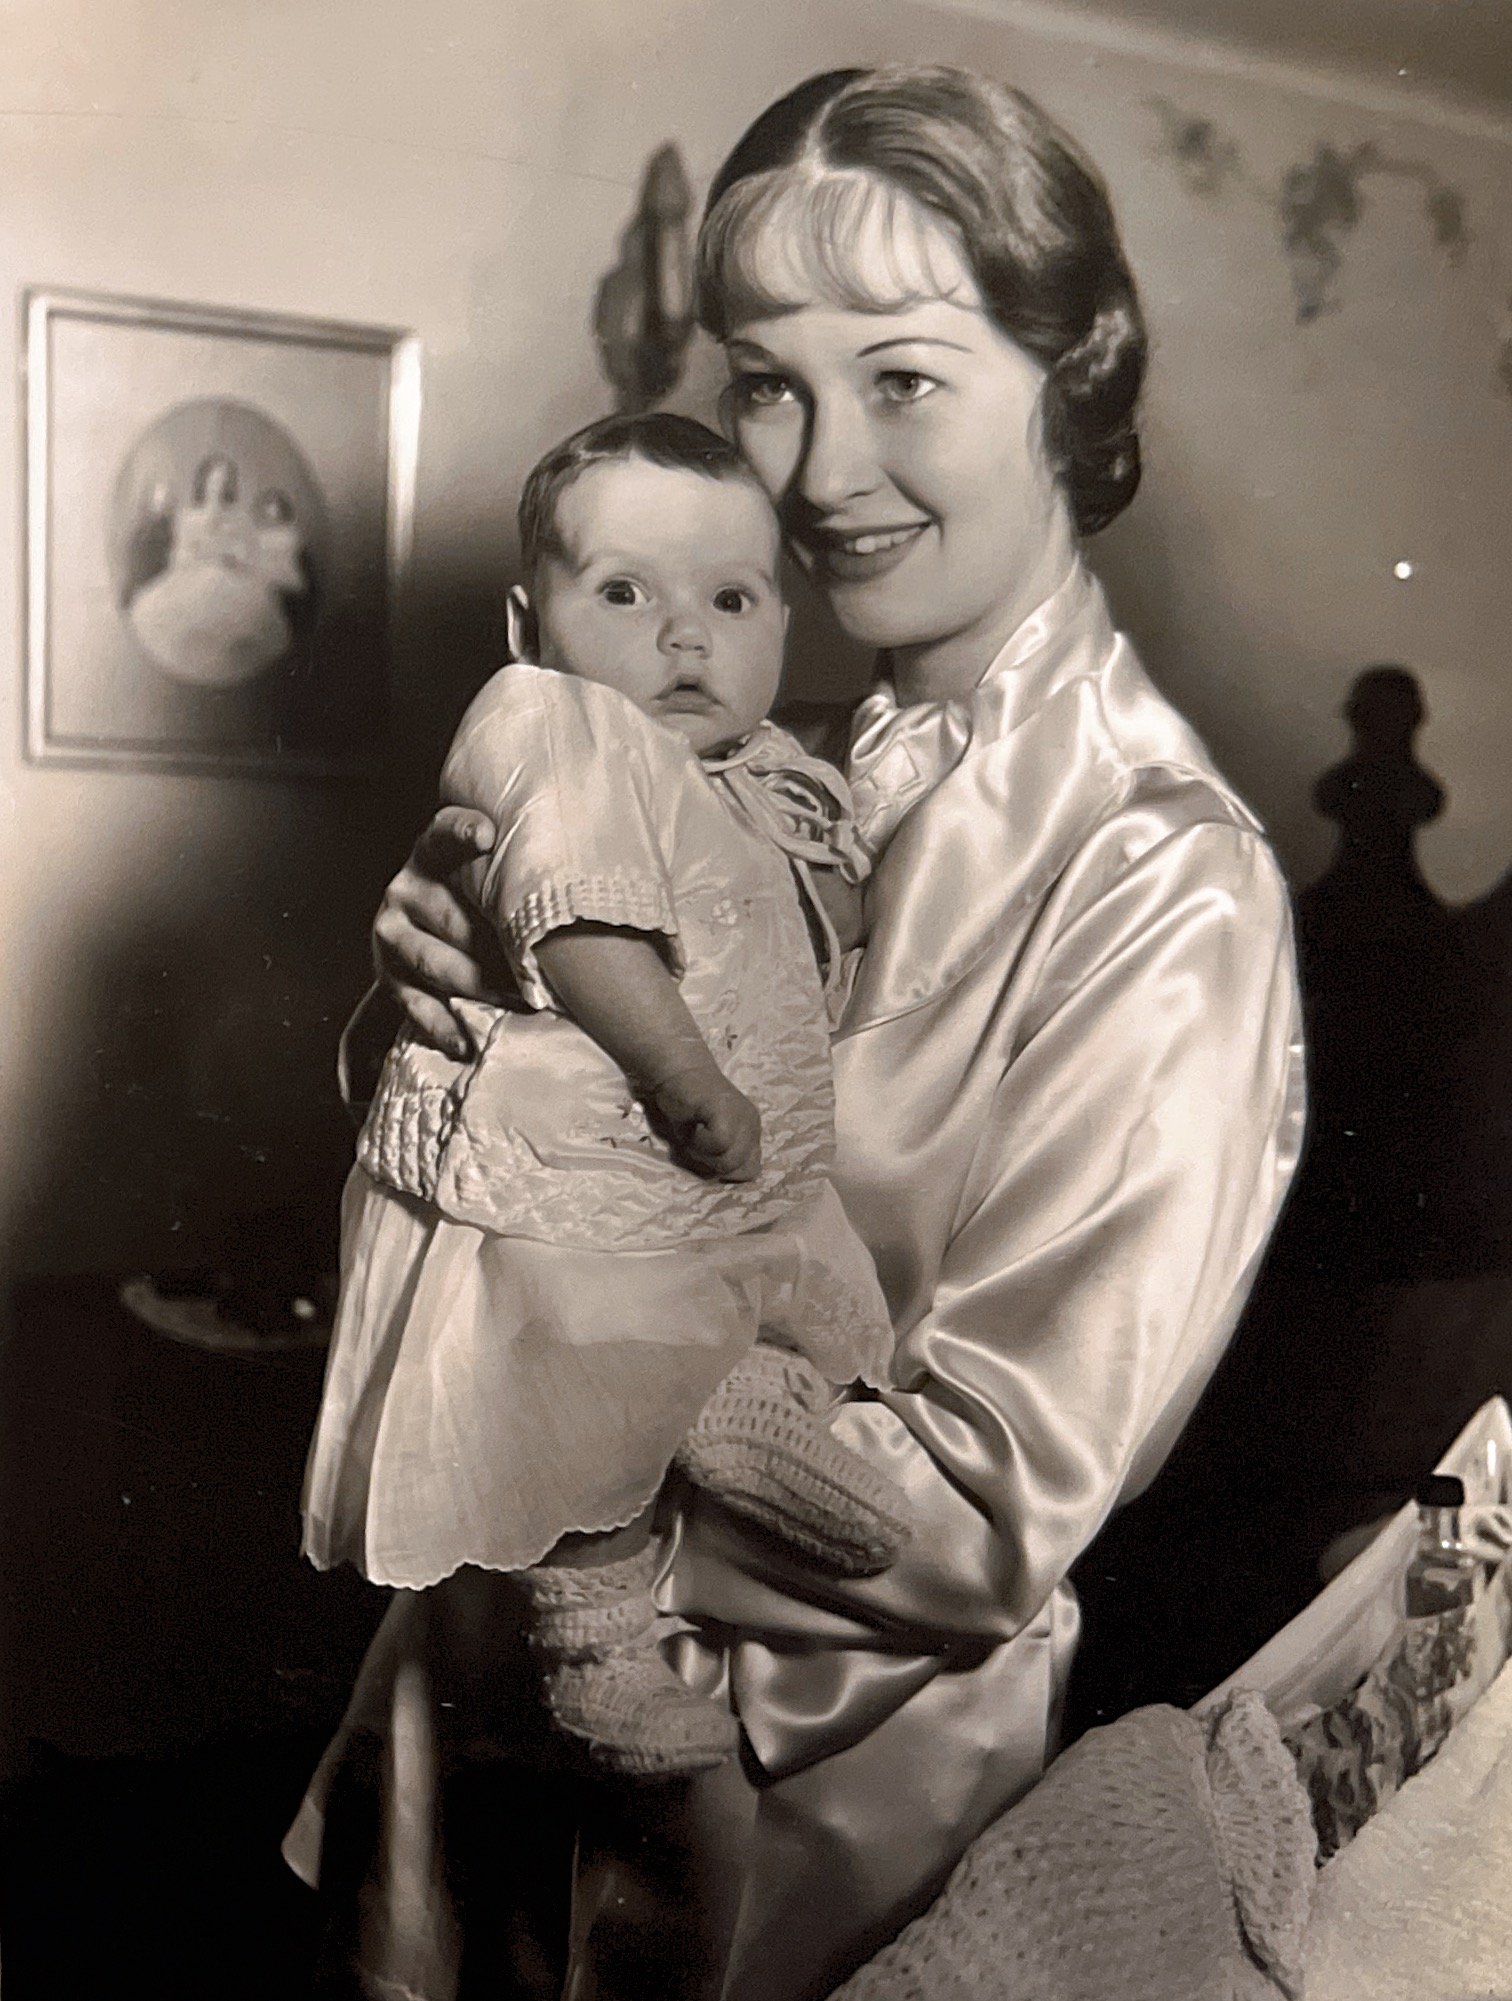 Dolores (at six weeks old) with her mother Evelyn Venable. This photograph was take in January of 1936.